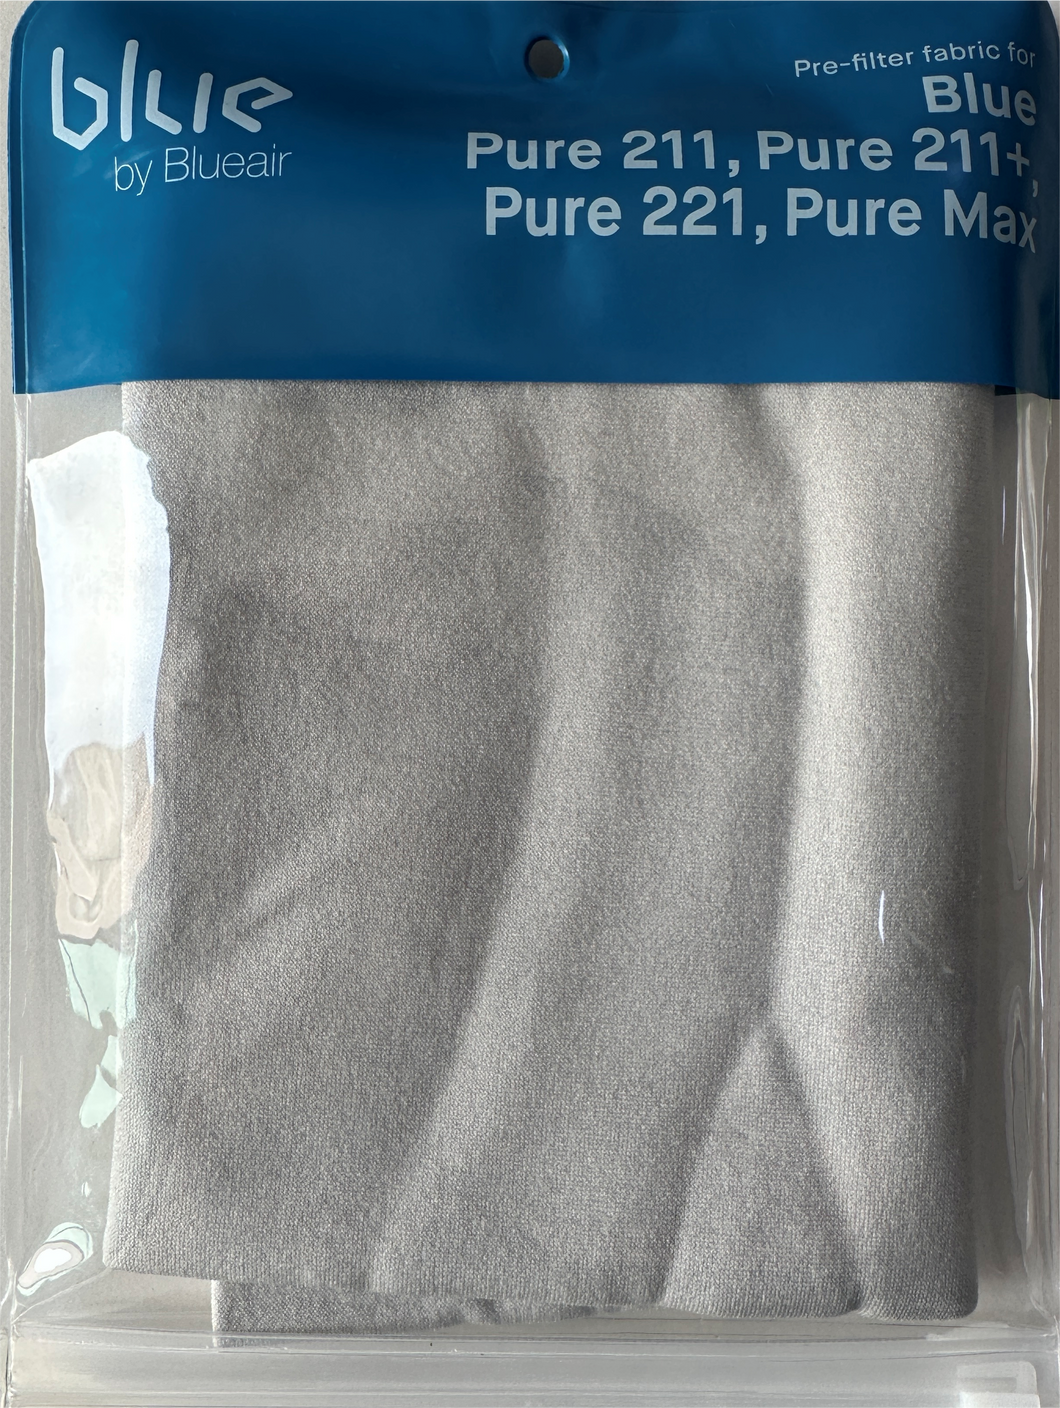 Pre-filter for Air Purifier 211